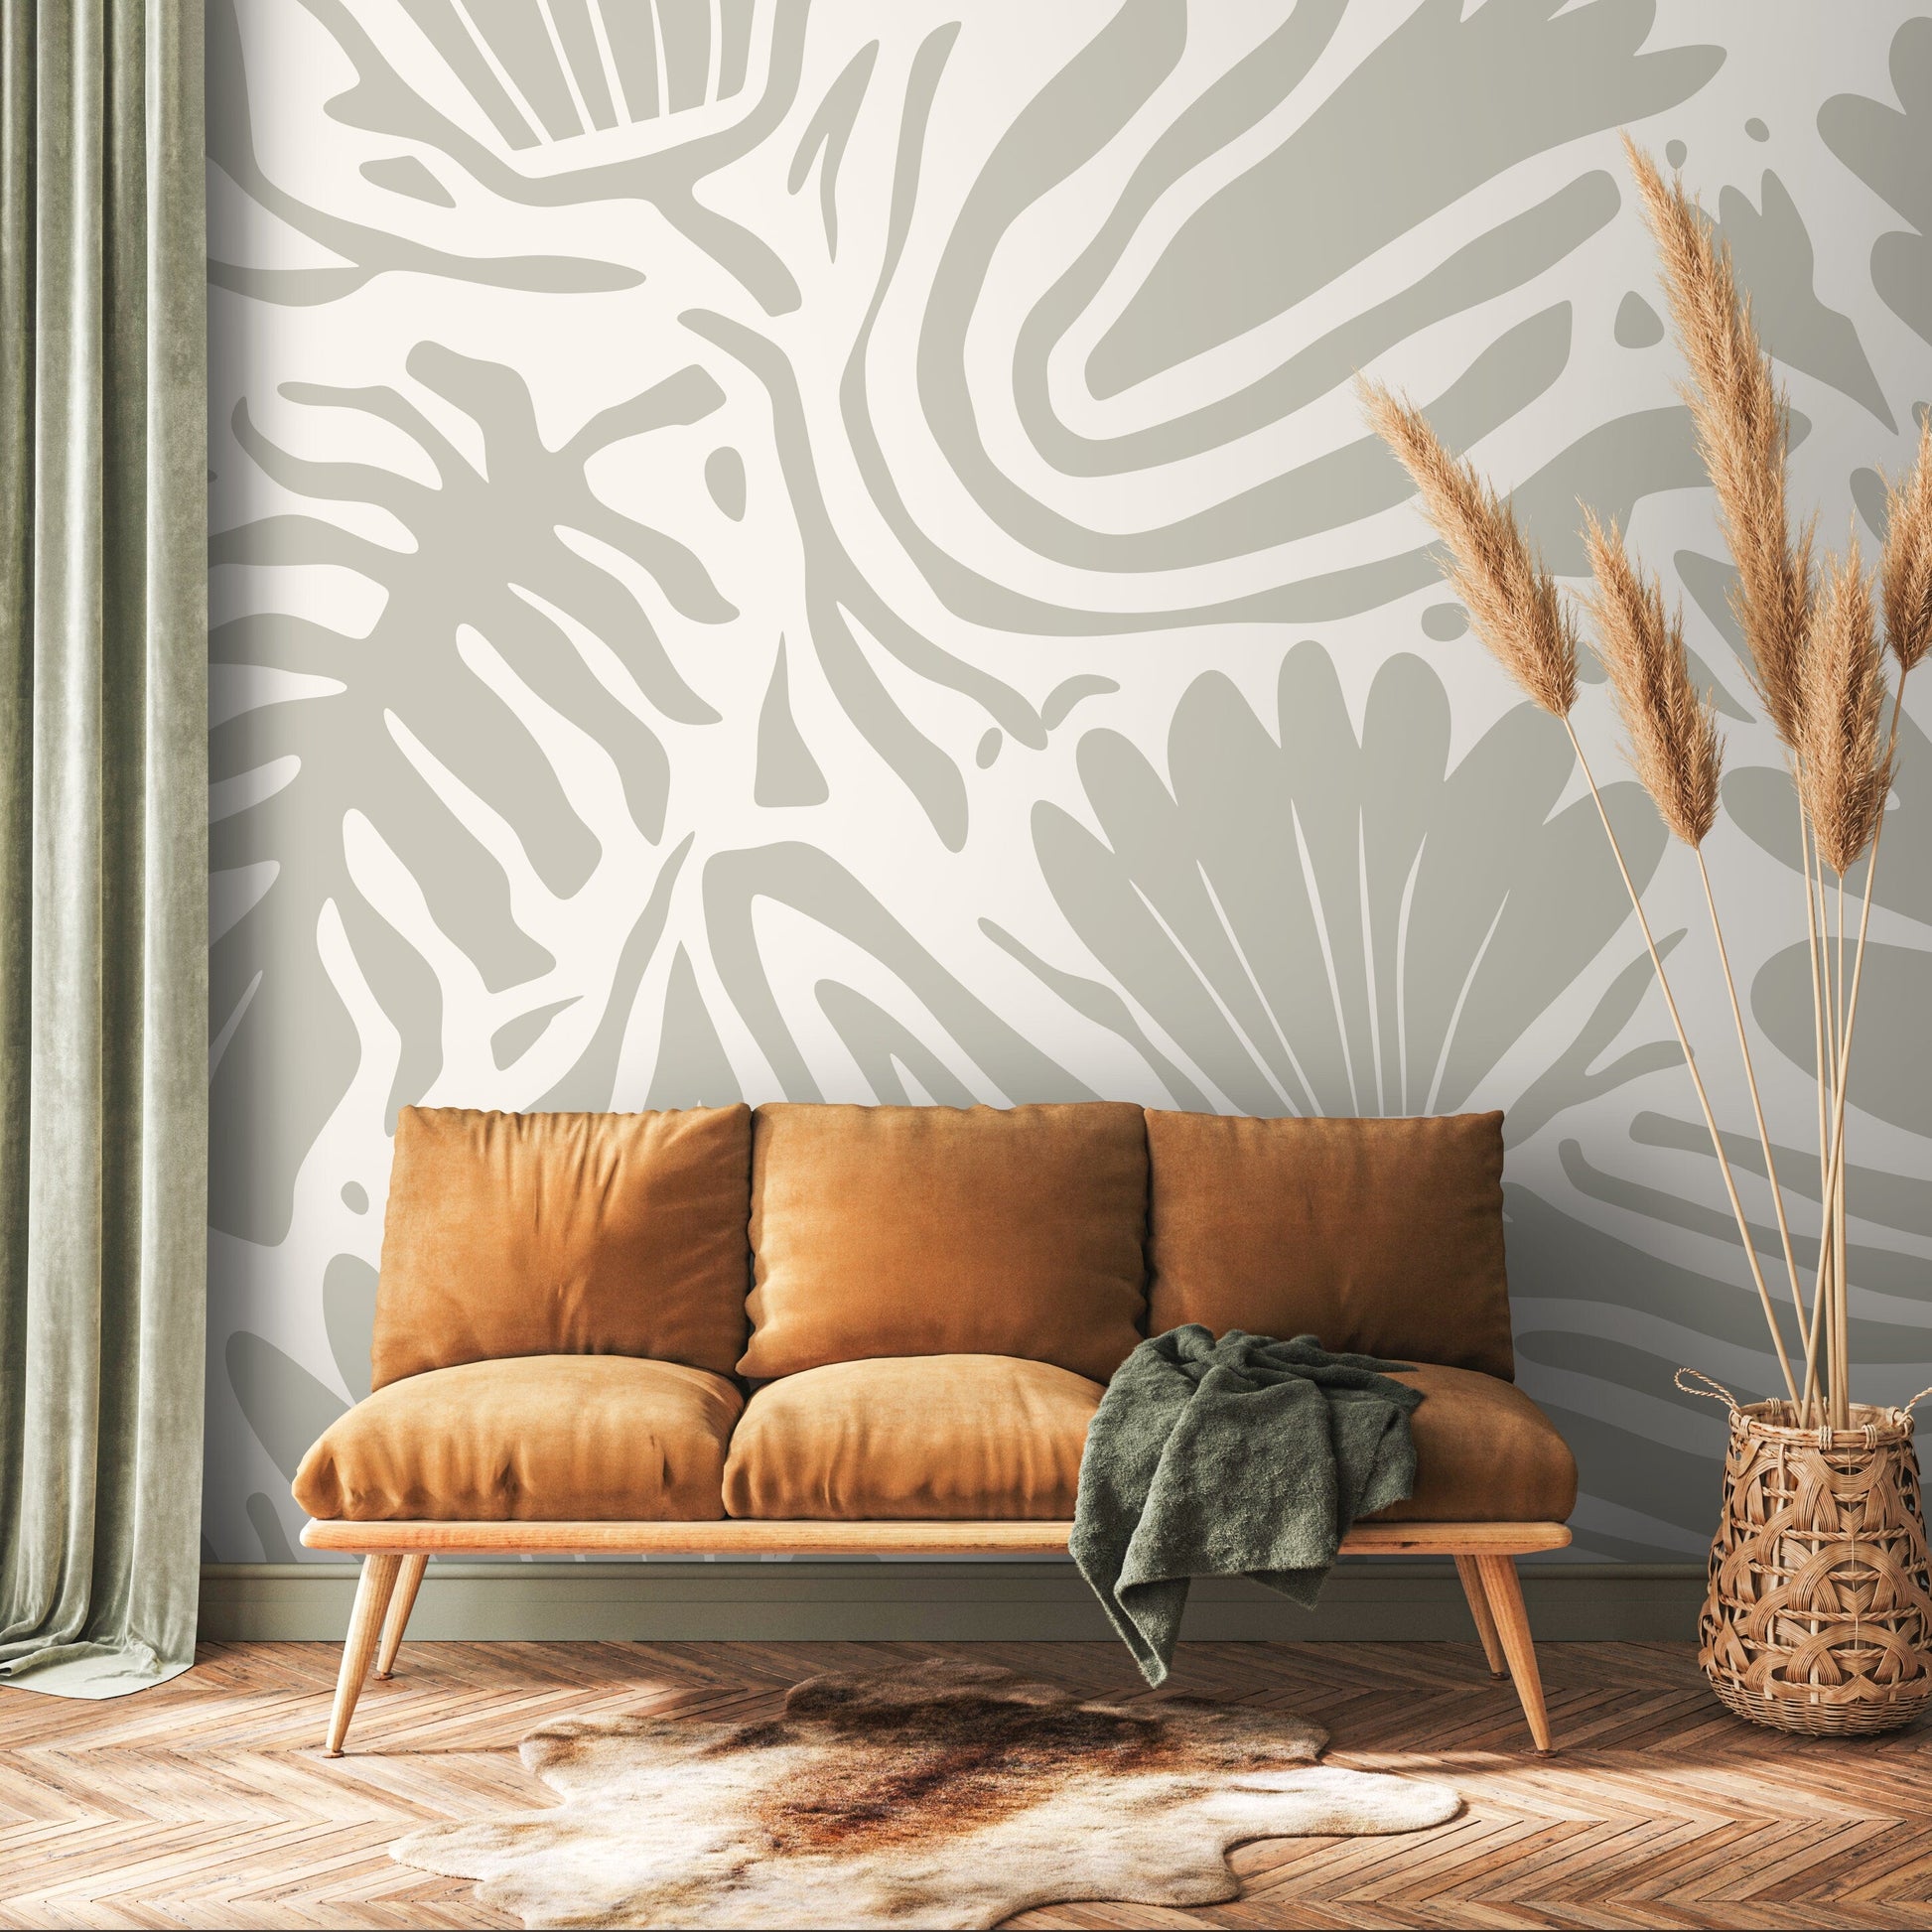 Floral and Leaves Mural Abstract Boho Wallpaper Peel and Stick and Traditional Wallpaper - D716